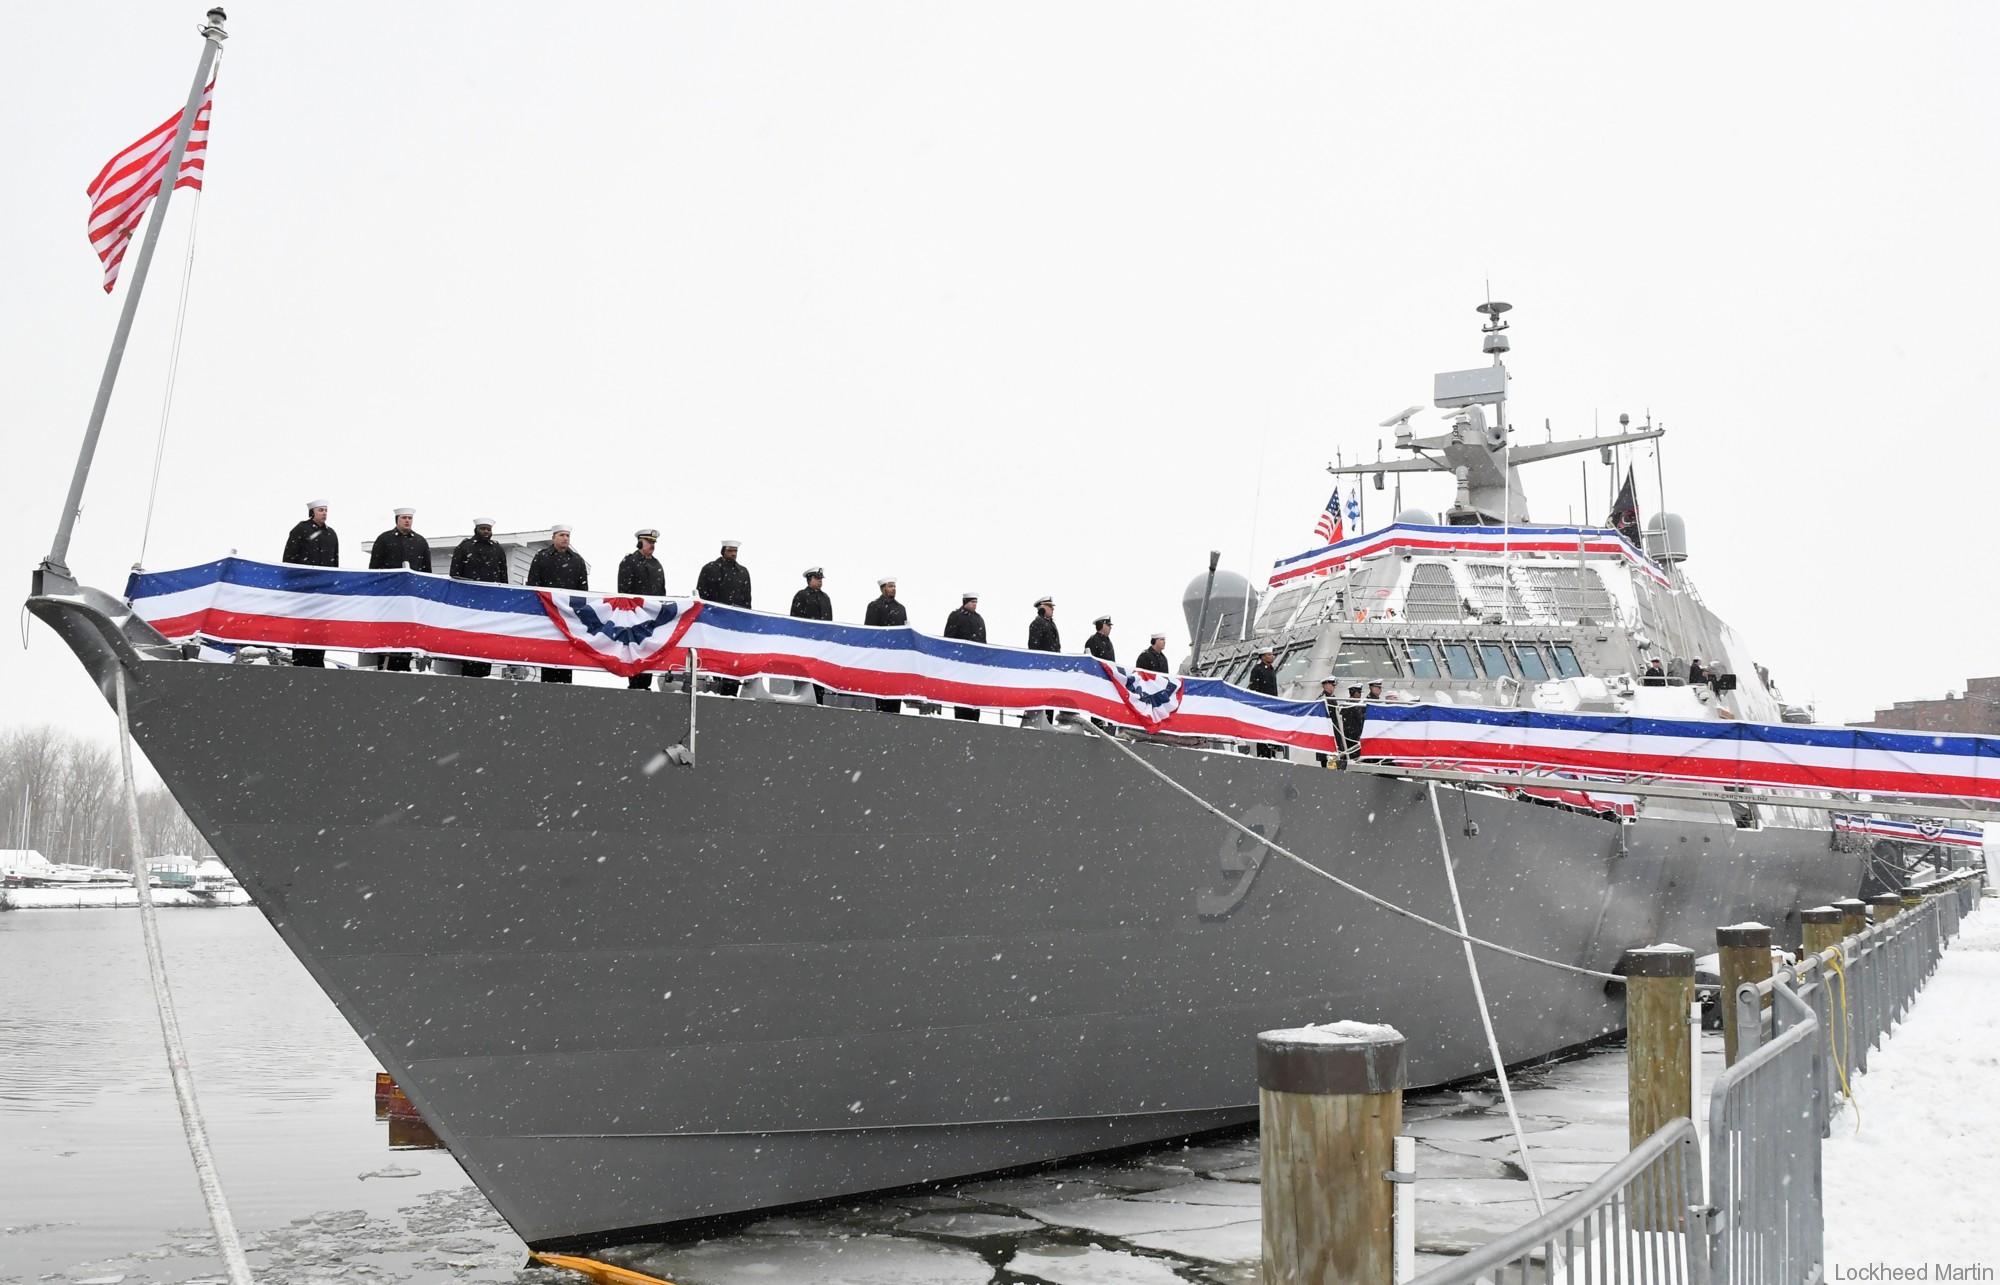 lcs-9 uss little rock freedom class littoral combat ship us navy 26 commissioning ceremony buffalo new york